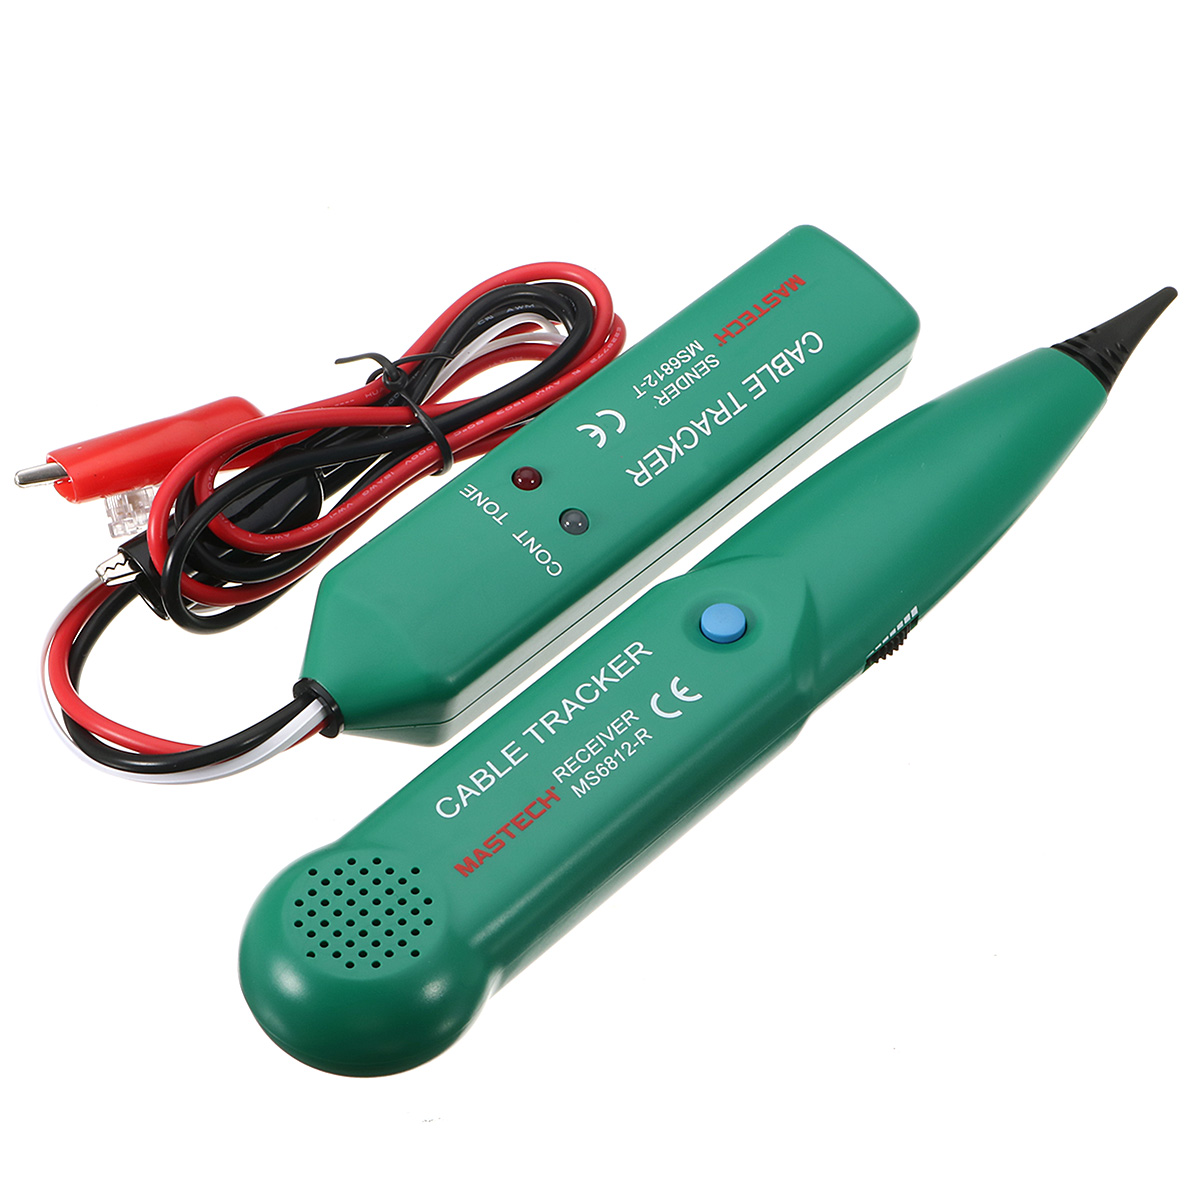 MS6812-Cable-Finder-Tone-Generator-Probe-Tracker-Wire-Network-Cable-Tester-Tracer-Kit-1288893-2